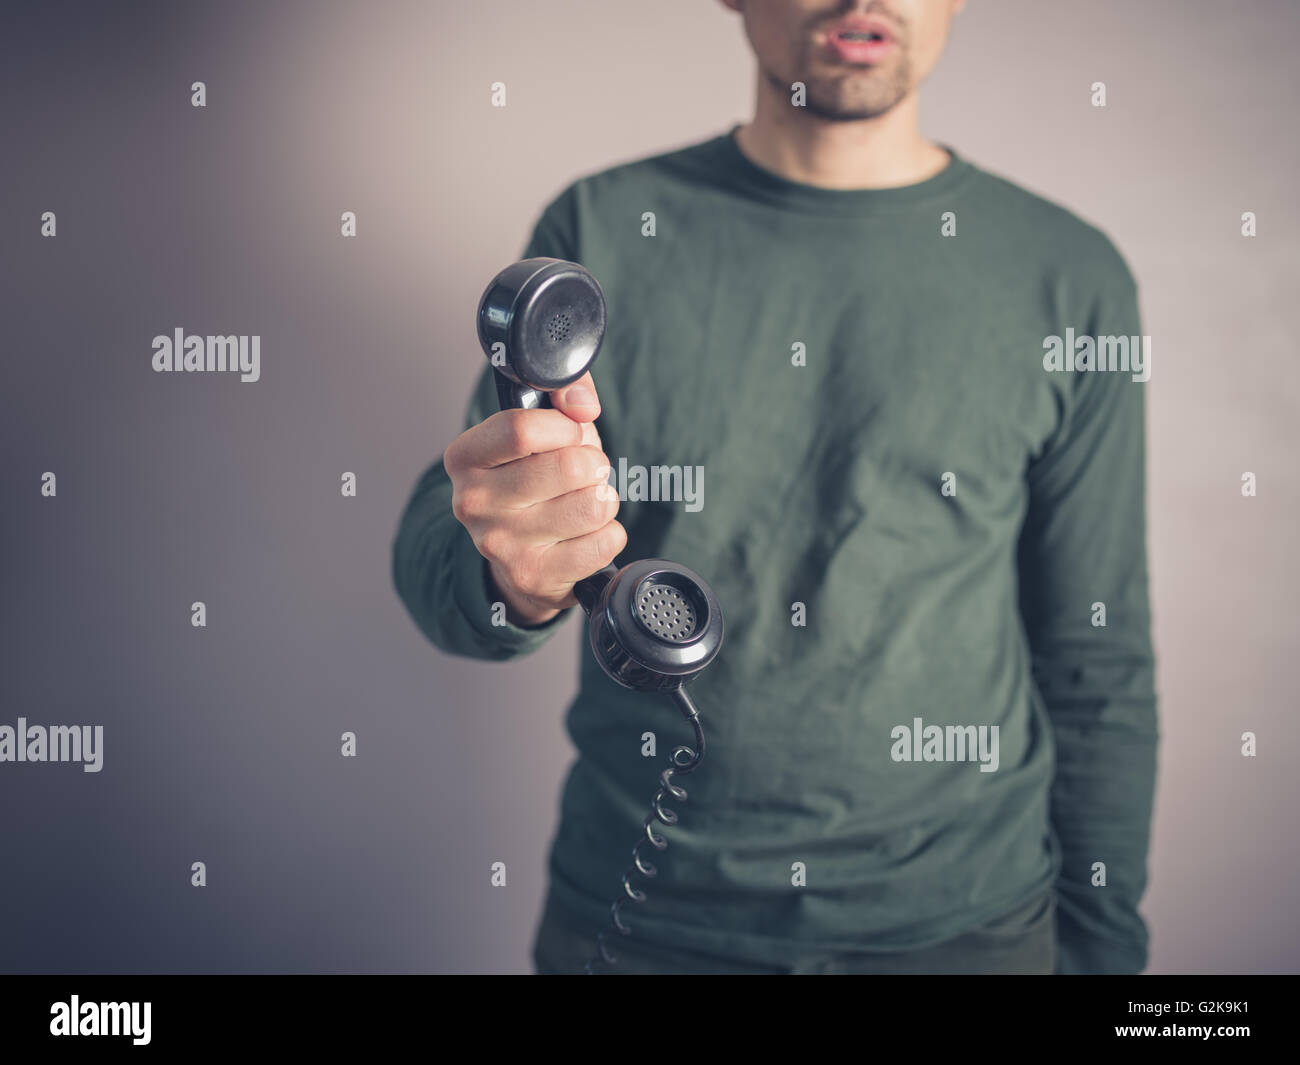 A concerned and worried looking young man is holding the receiver of a vintage rotary phone Stock Photo